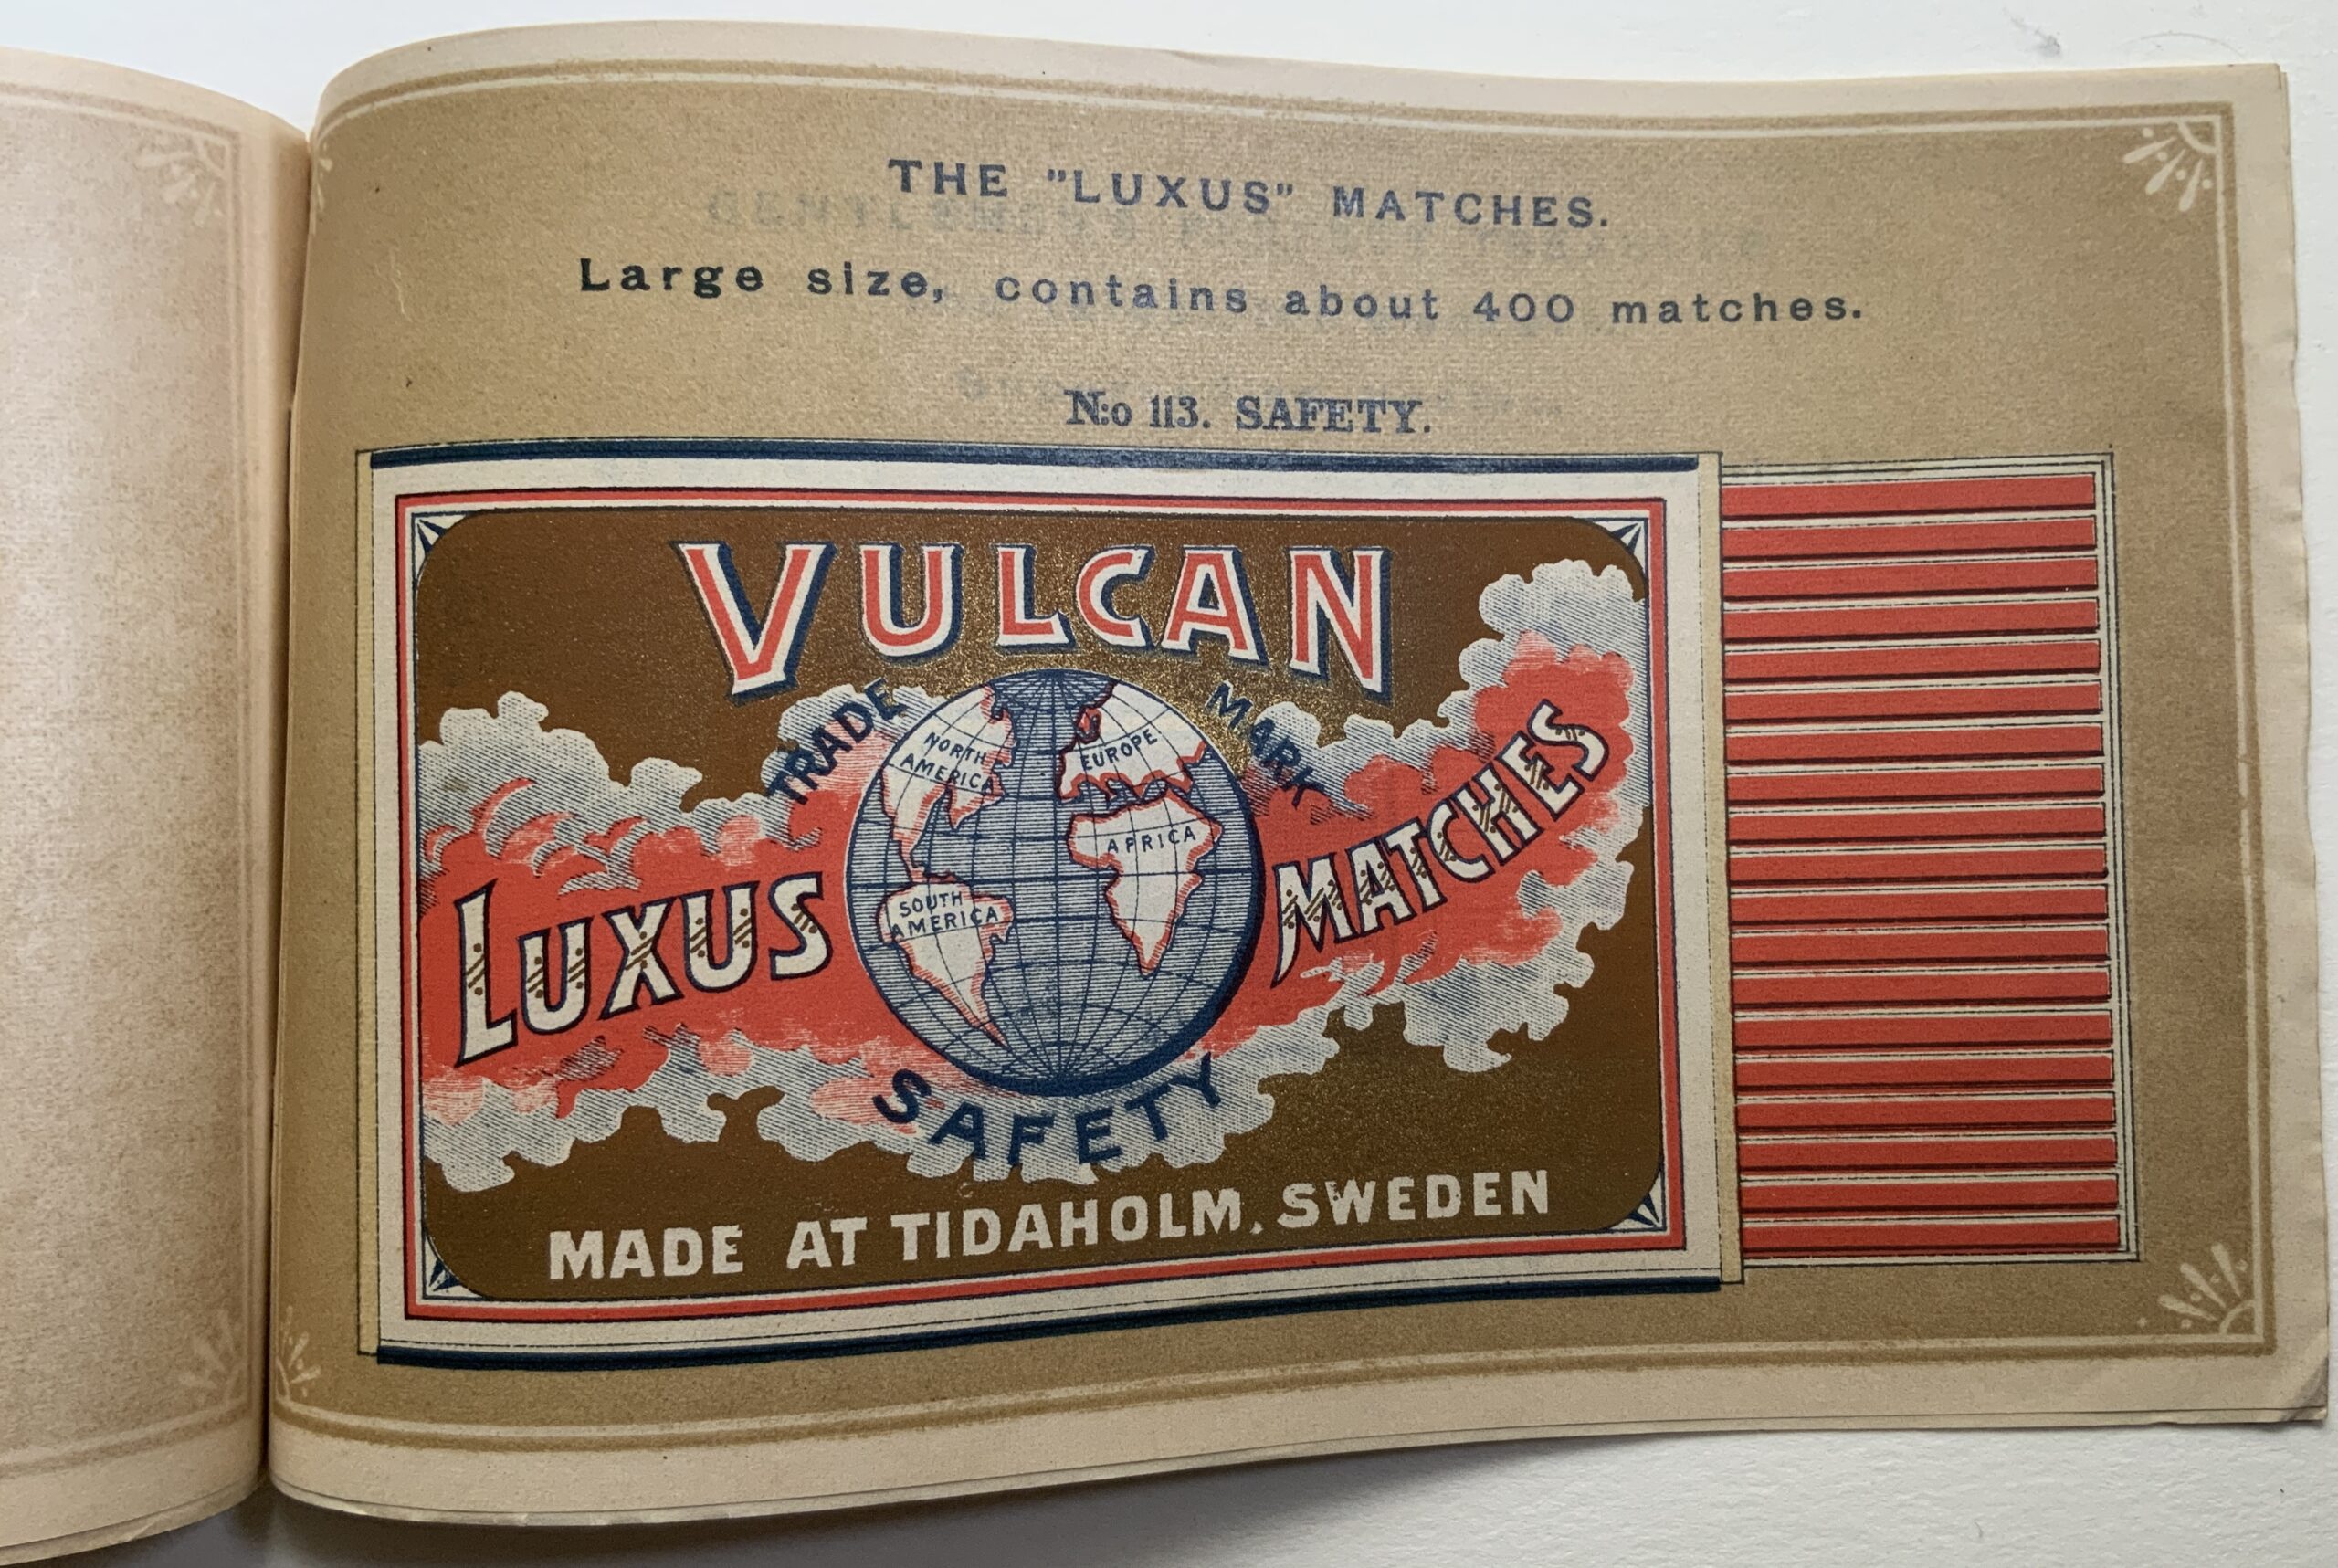 M416	MATCHBOOK STOCKBOOK PUBLISHED BY THE VULCAN MATCH MANUFACTURING COMPANY - SWEDEN